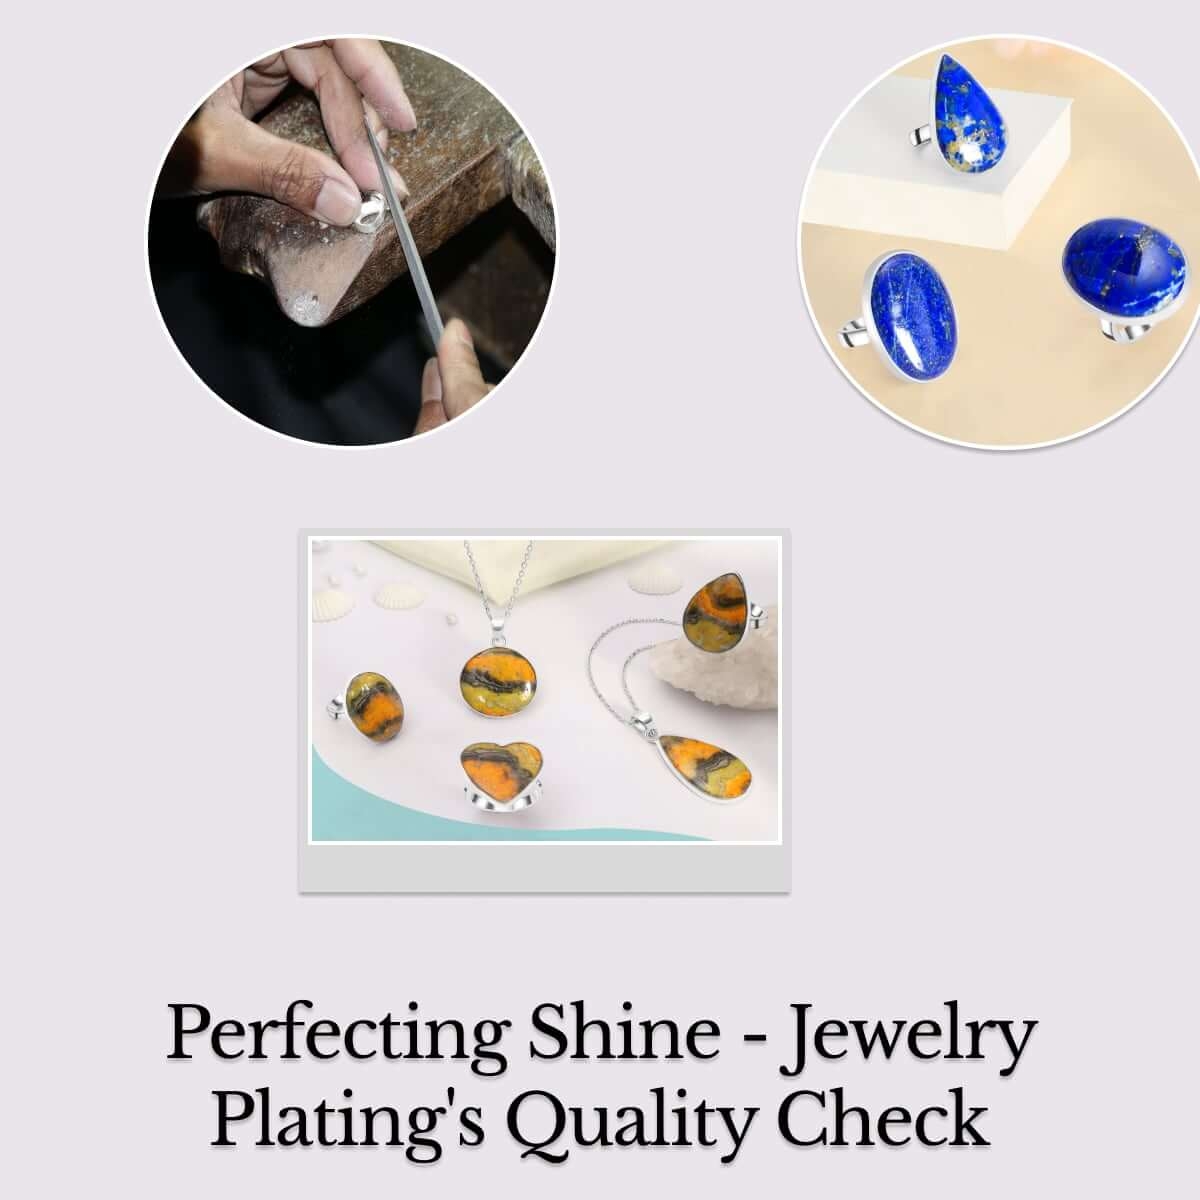 Quality Control and Jewelry Plating